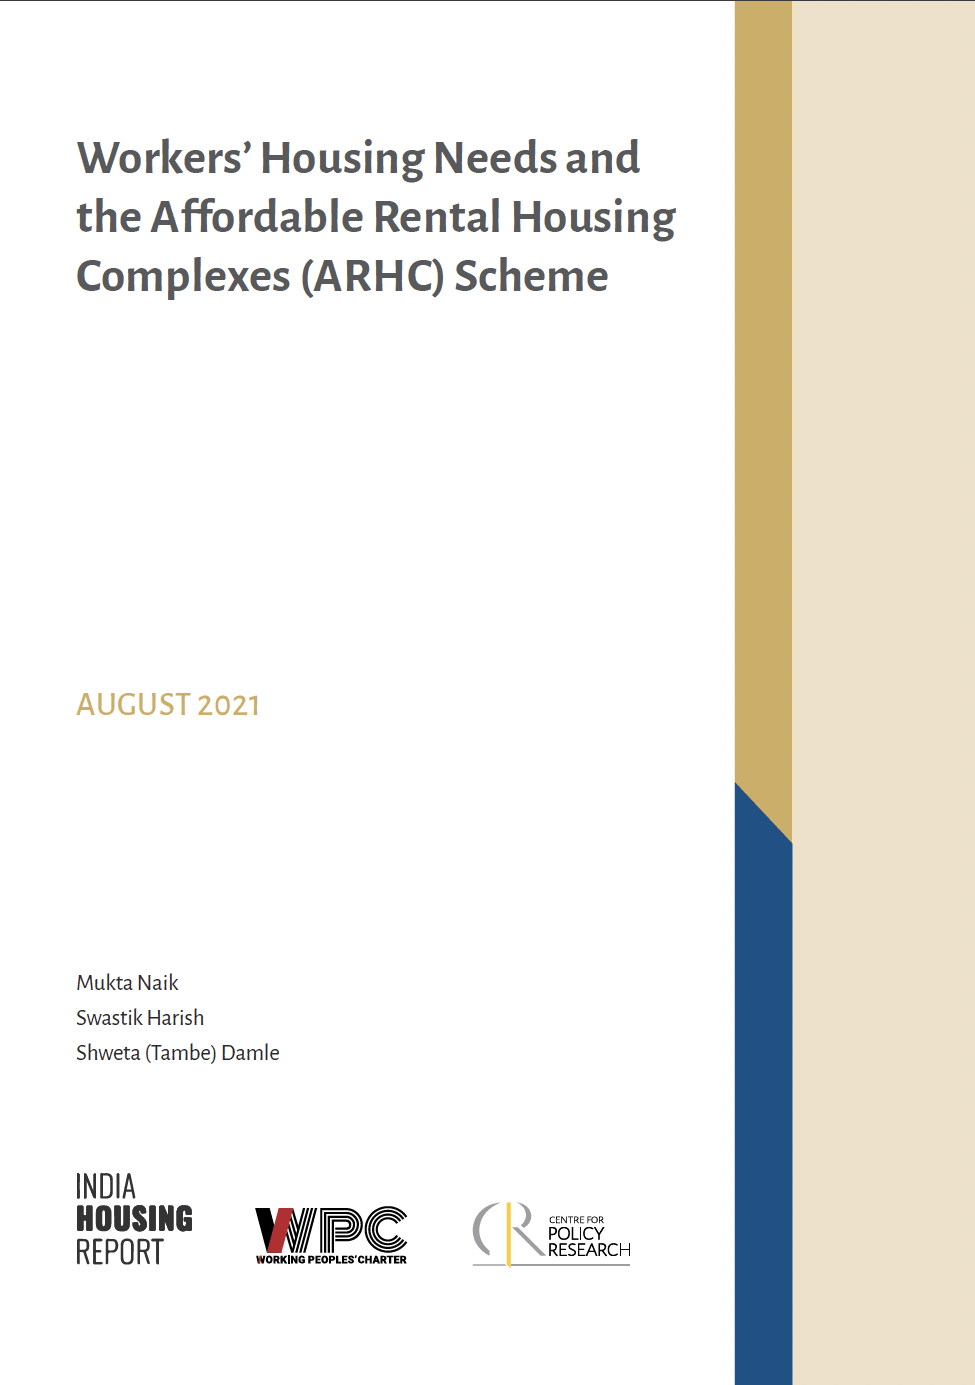 Workers Housing Needs and the Affordable Rental Housing Complexes (ARHC) Scheme